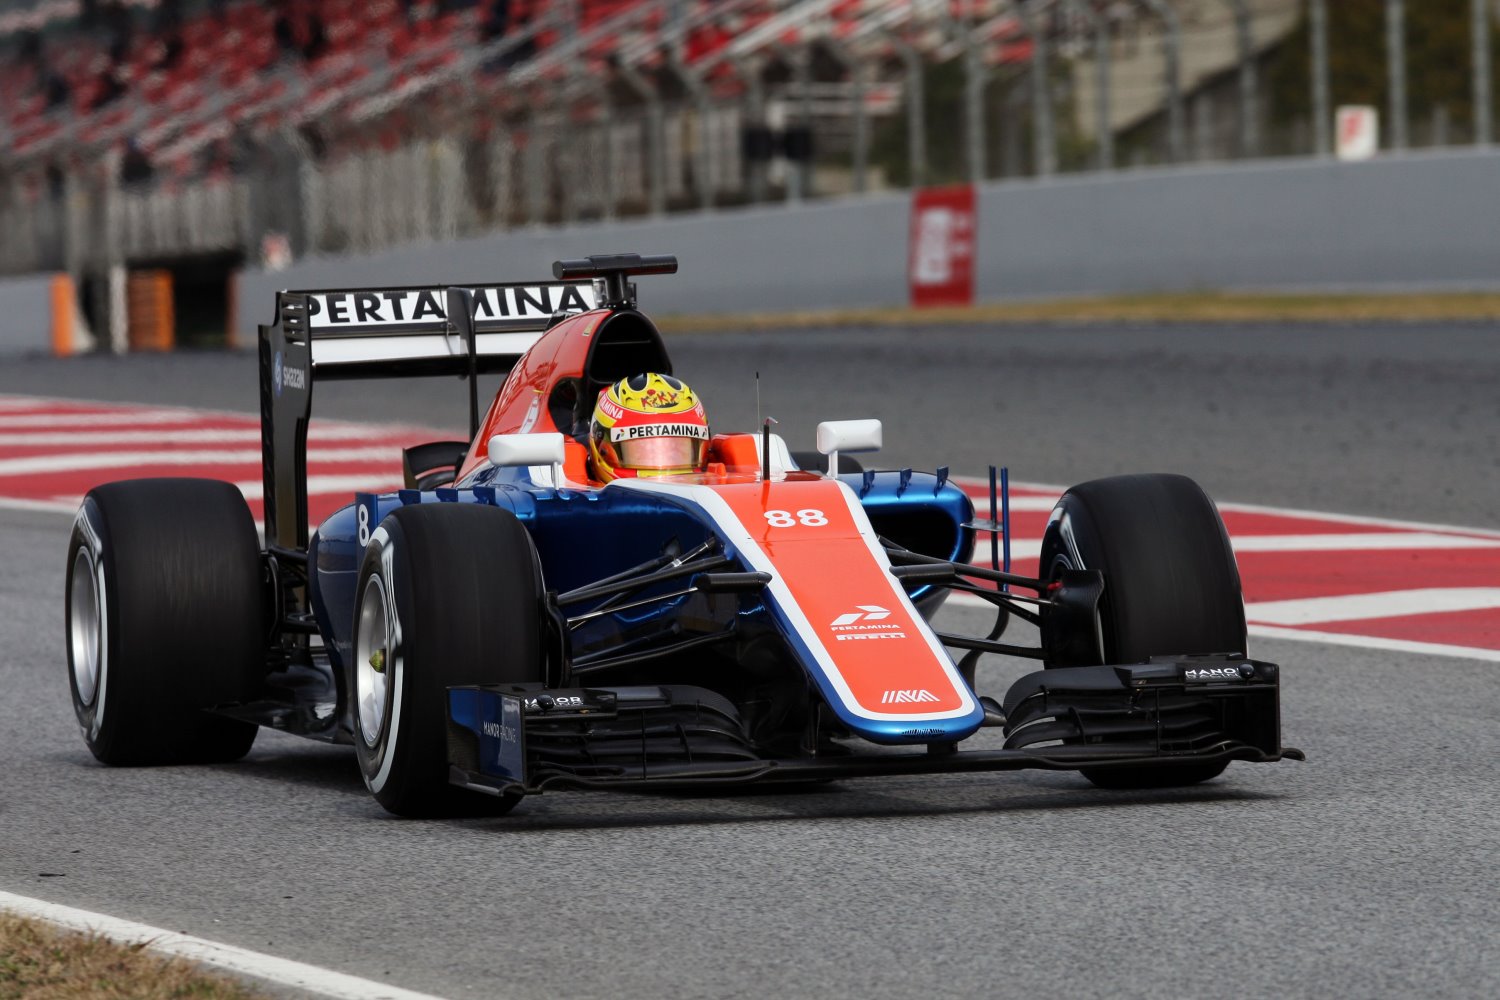 Manor nows has a Mercedes engine so they will move ahead of hapless Sauber